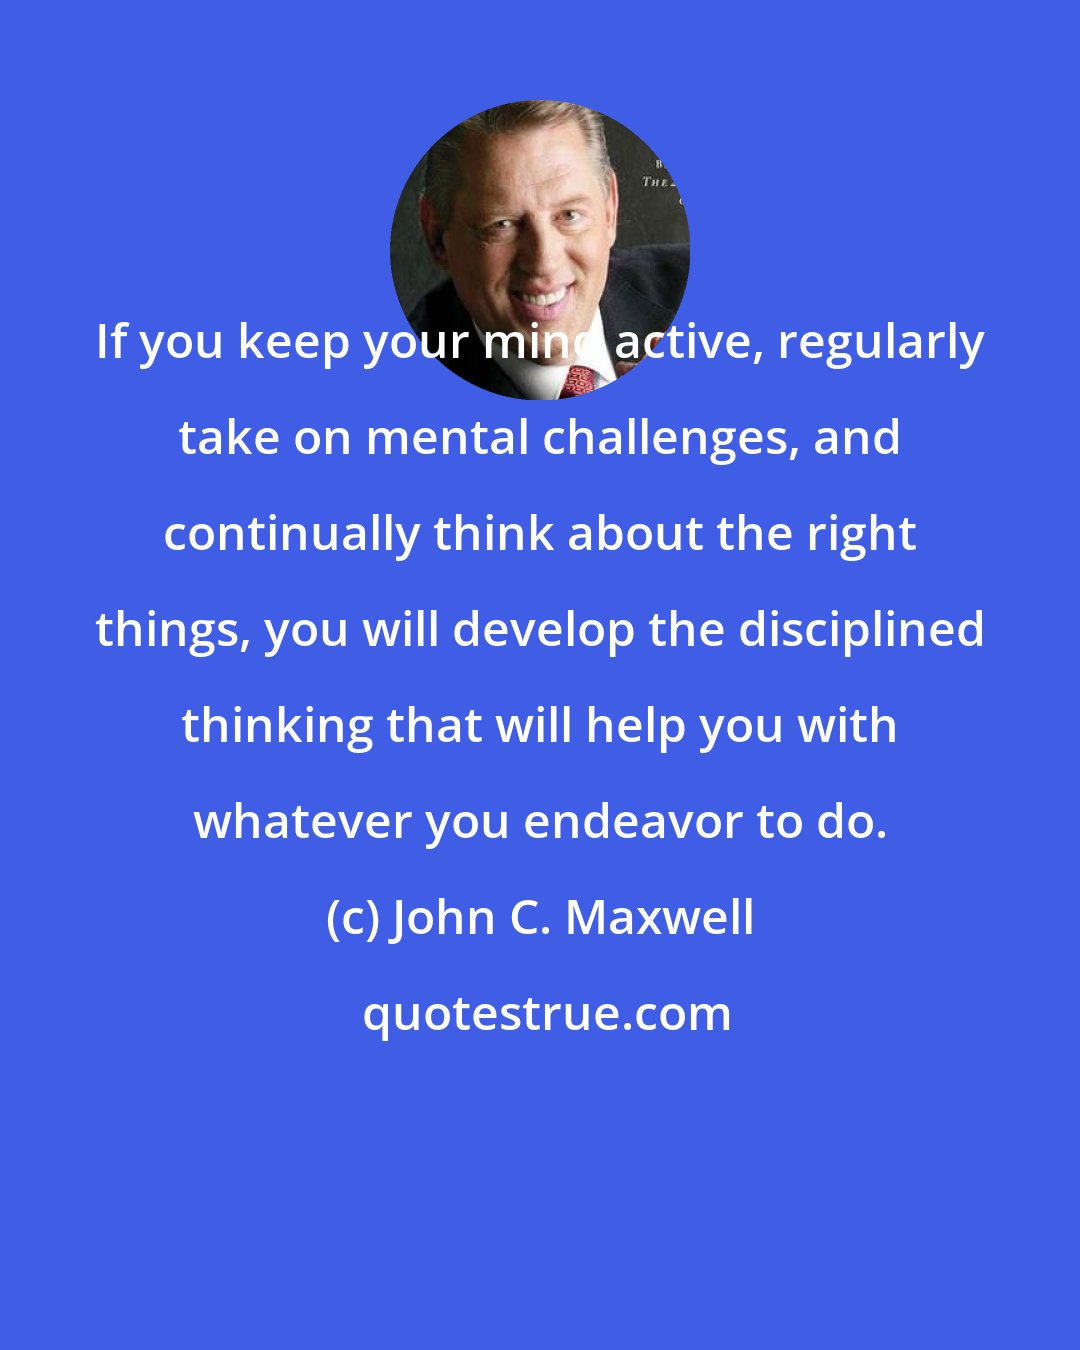 John C. Maxwell: If you keep your mind active, regularly take on mental challenges, and continually think about the right things, you will develop the disciplined thinking that will help you with whatever you endeavor to do.